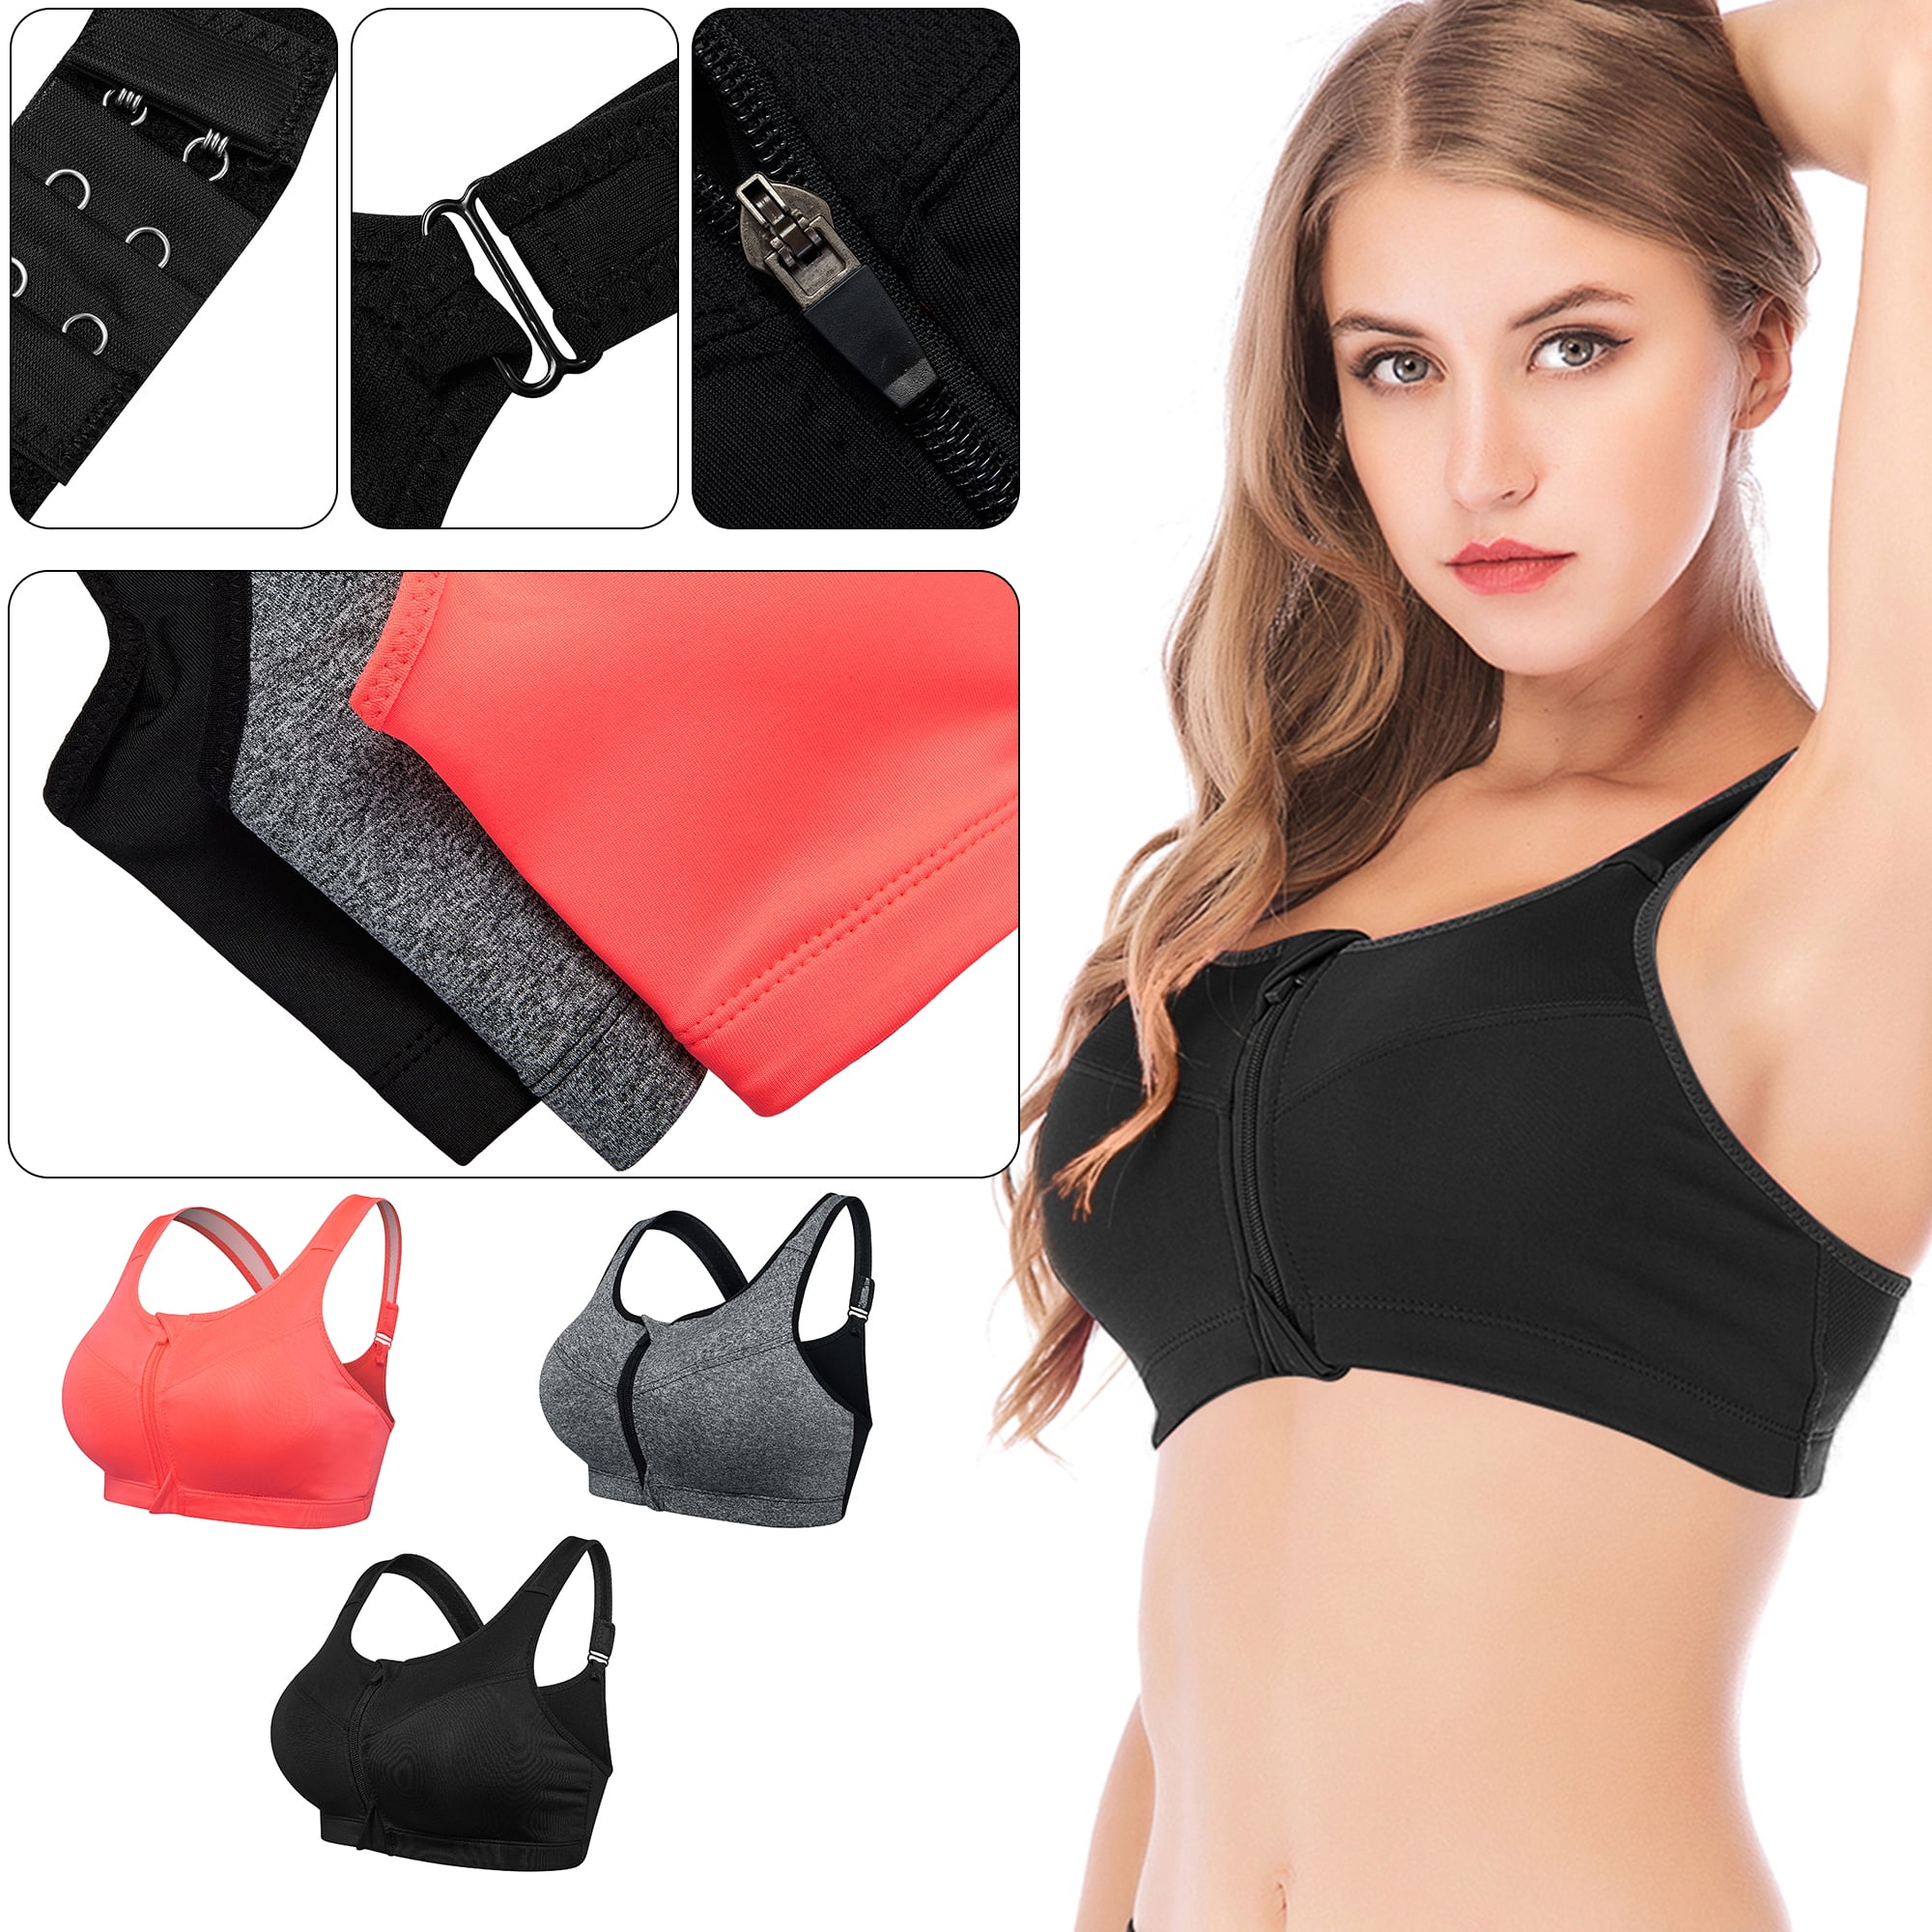 Sports Bra Zip Front for Women Medium Support Sports Bra Padded Matched  With Skirt T-shirt Dress Sweater Open Tops For Daily Life